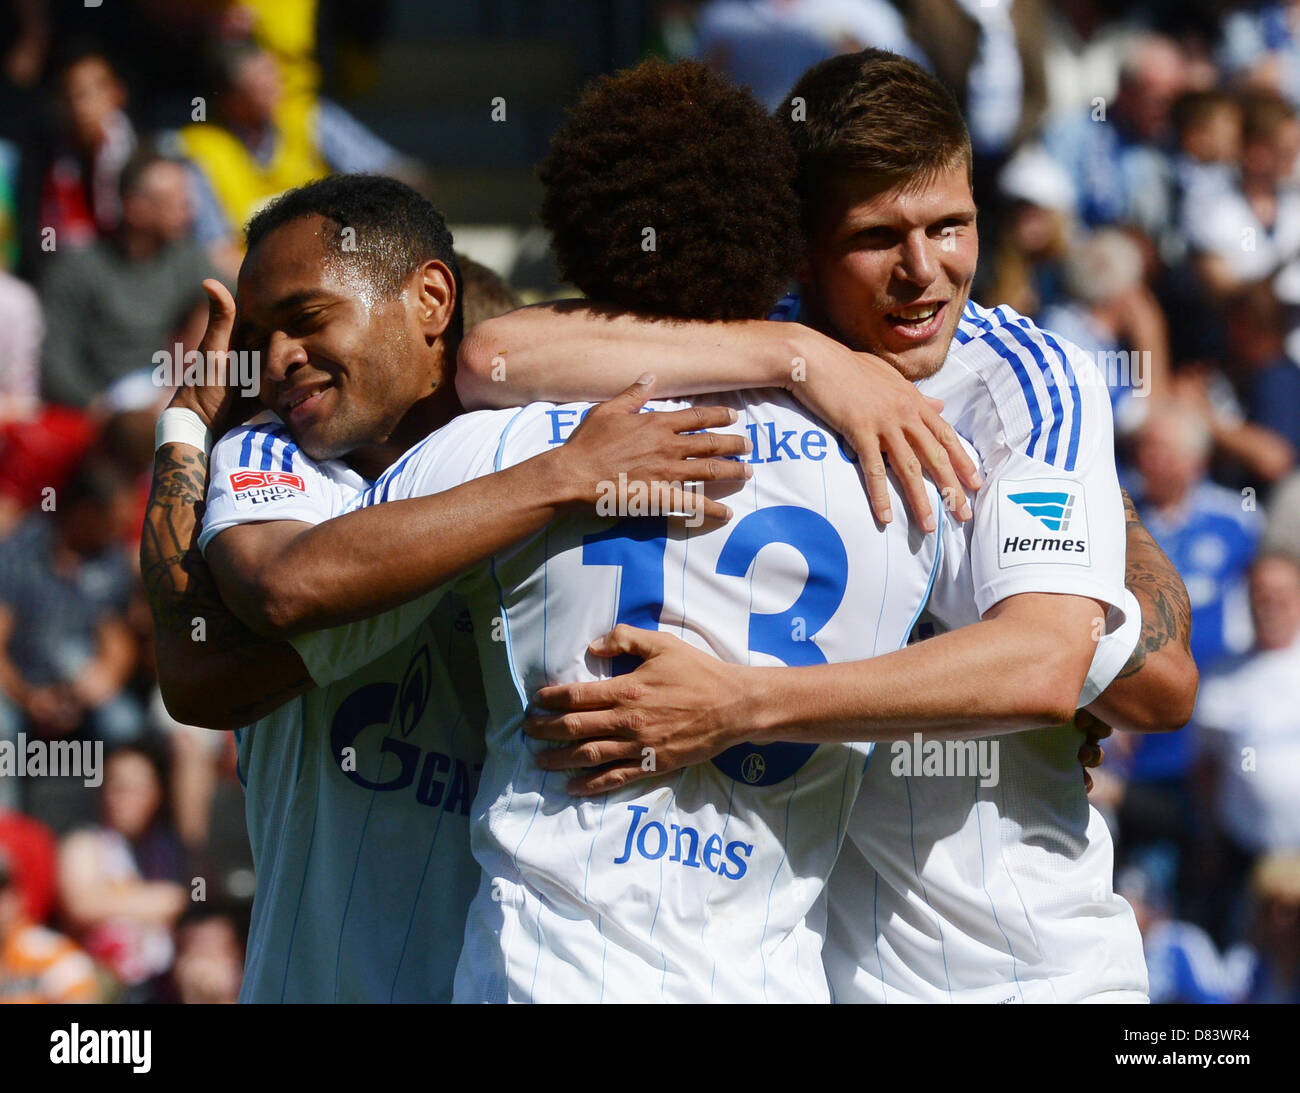 Schalke's Raffael, Jermaine Jones and Klaas-Jan Huntelaar (L-R) cheer after the 2-1 own goal of Freiburg's Schuster during the Bundesliga soccer match between SC Freiburg and FC Schalke 04 at Mage Solar stadium in Freiburg, Germany, 18 May 2013. Photo: PATRICK SEEGER  (ATTENTION: EMBARGO CONDITIONS! The DFL permits the further utilisation of up to 15 pictures only (no sequntial pictures or video-similar series of pictures allowed) via the internet and online media during the match (including halftime), taken from inside the stadium and/or prior to the start of the match. The DFL permits the un Stock Photo